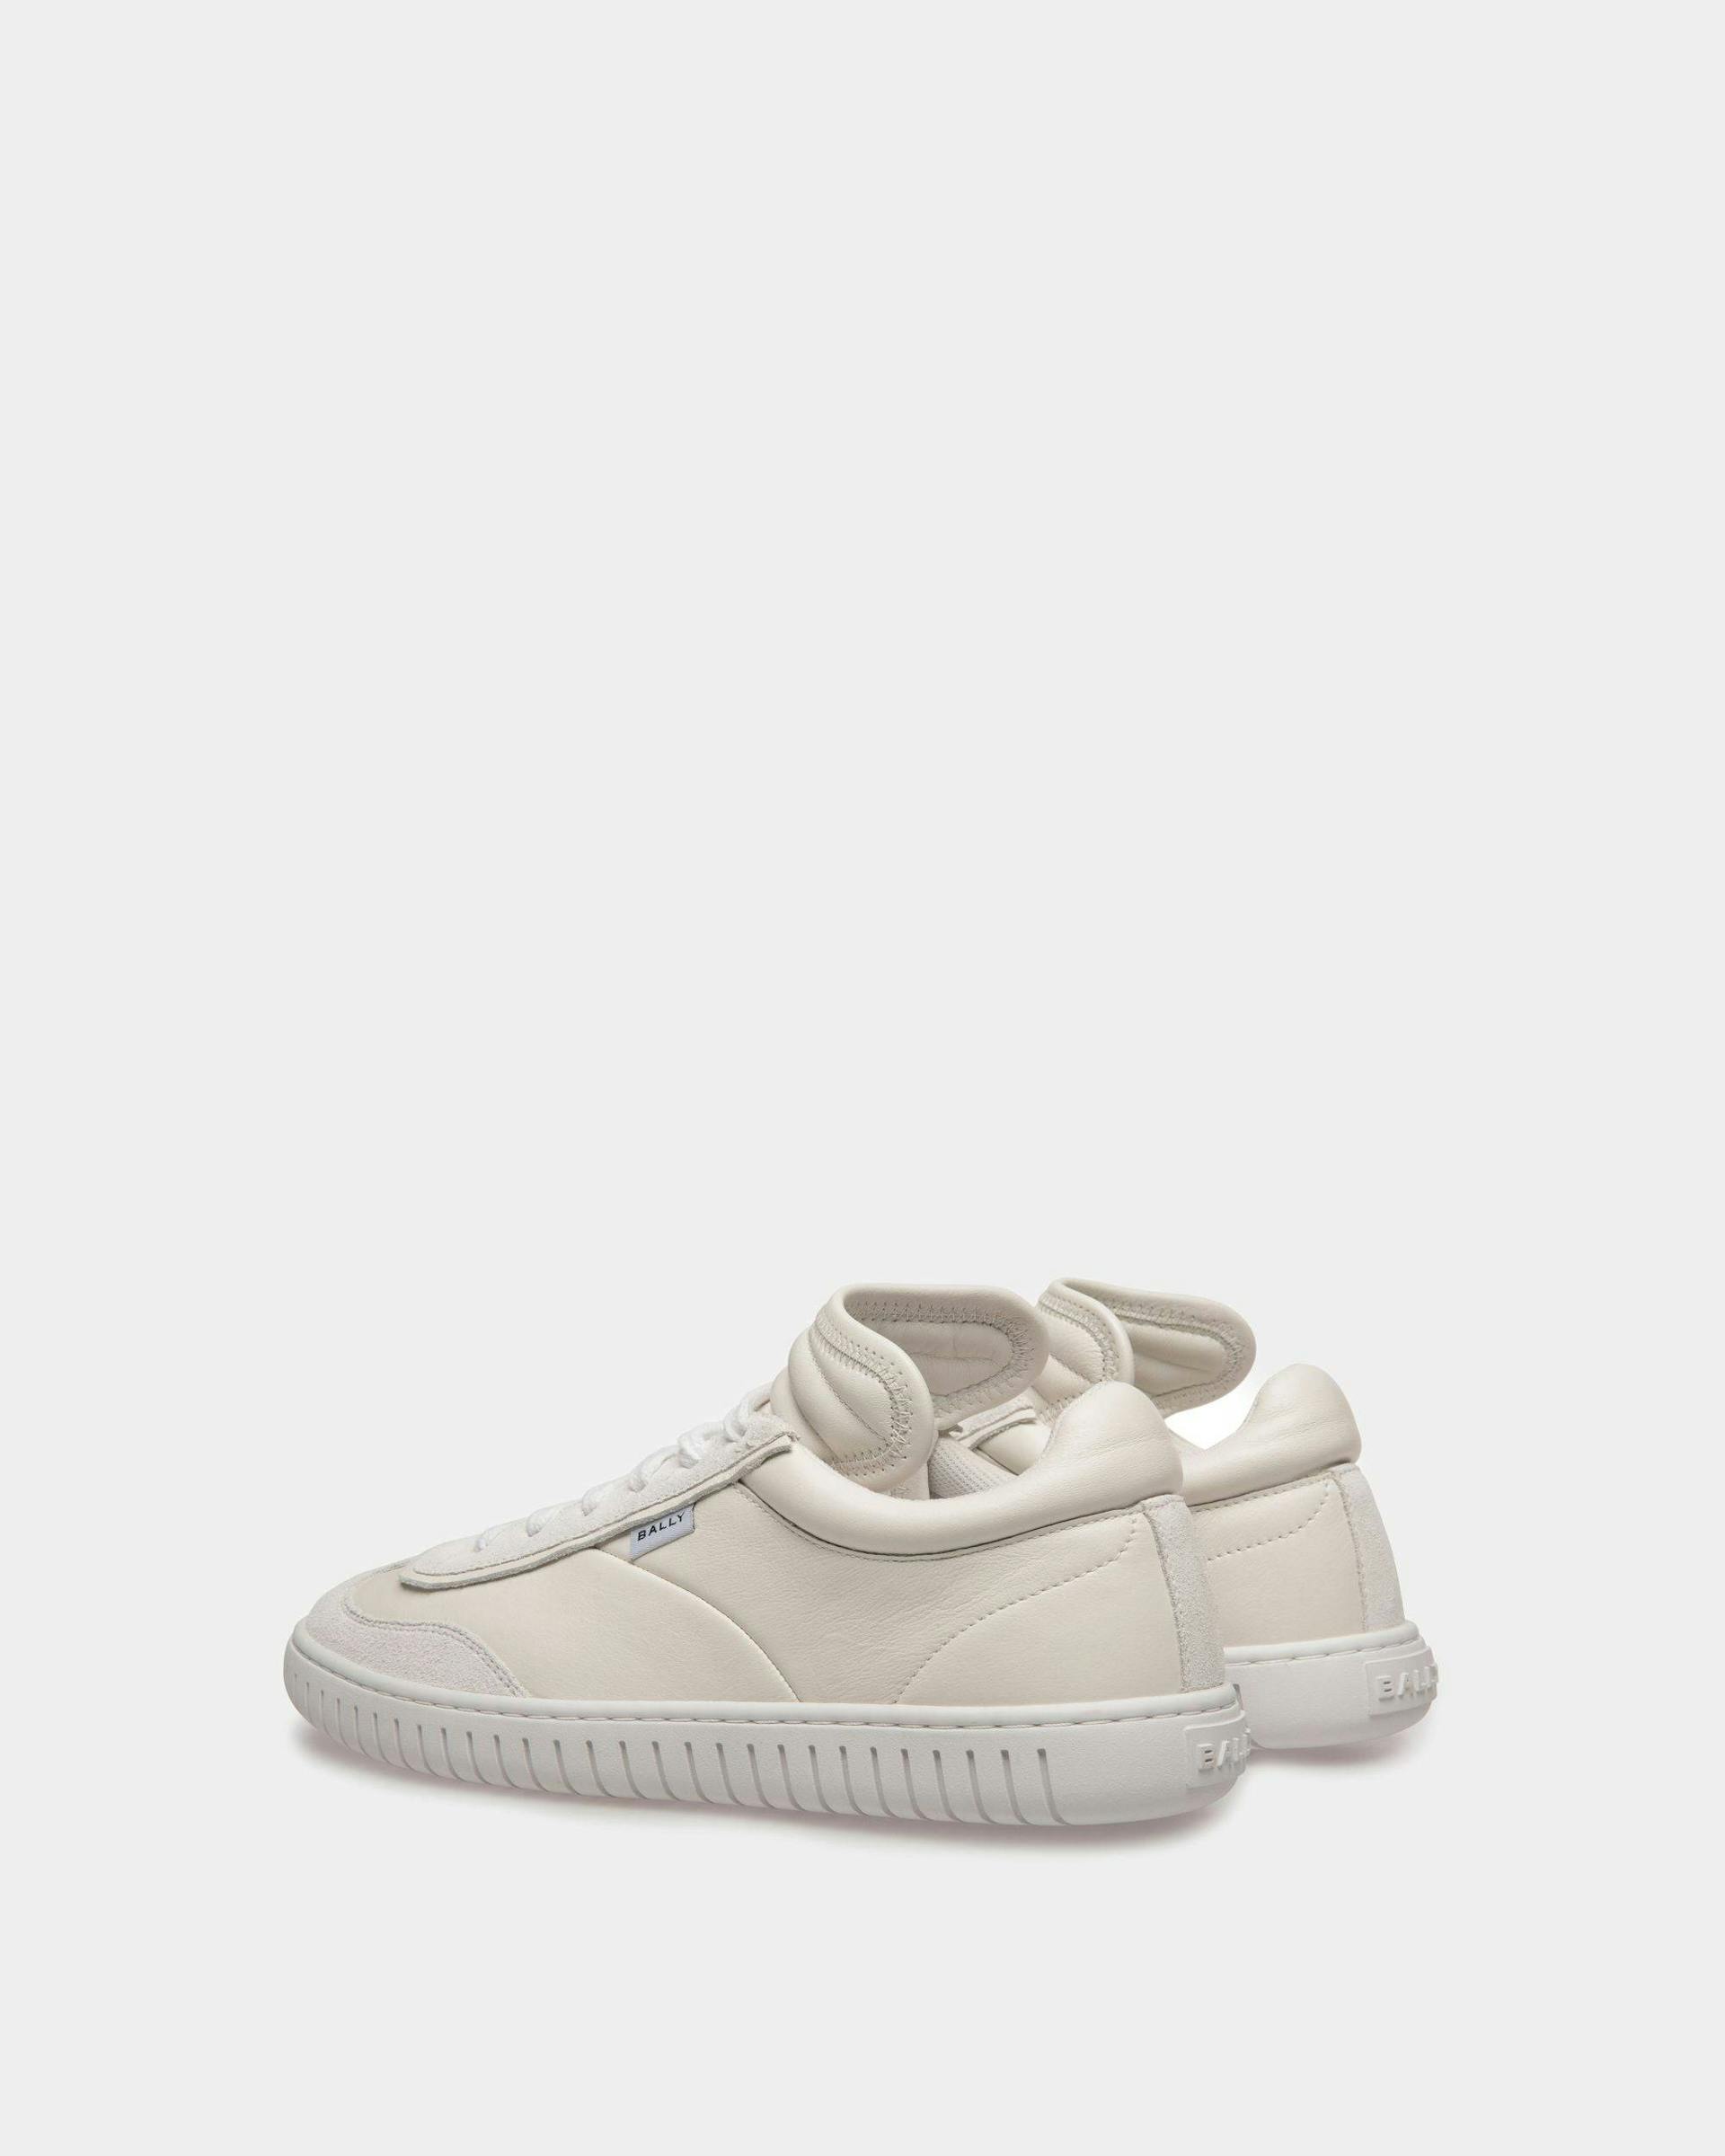 Sneaker Player In Pelle Bianca - Donna - Bally - 04